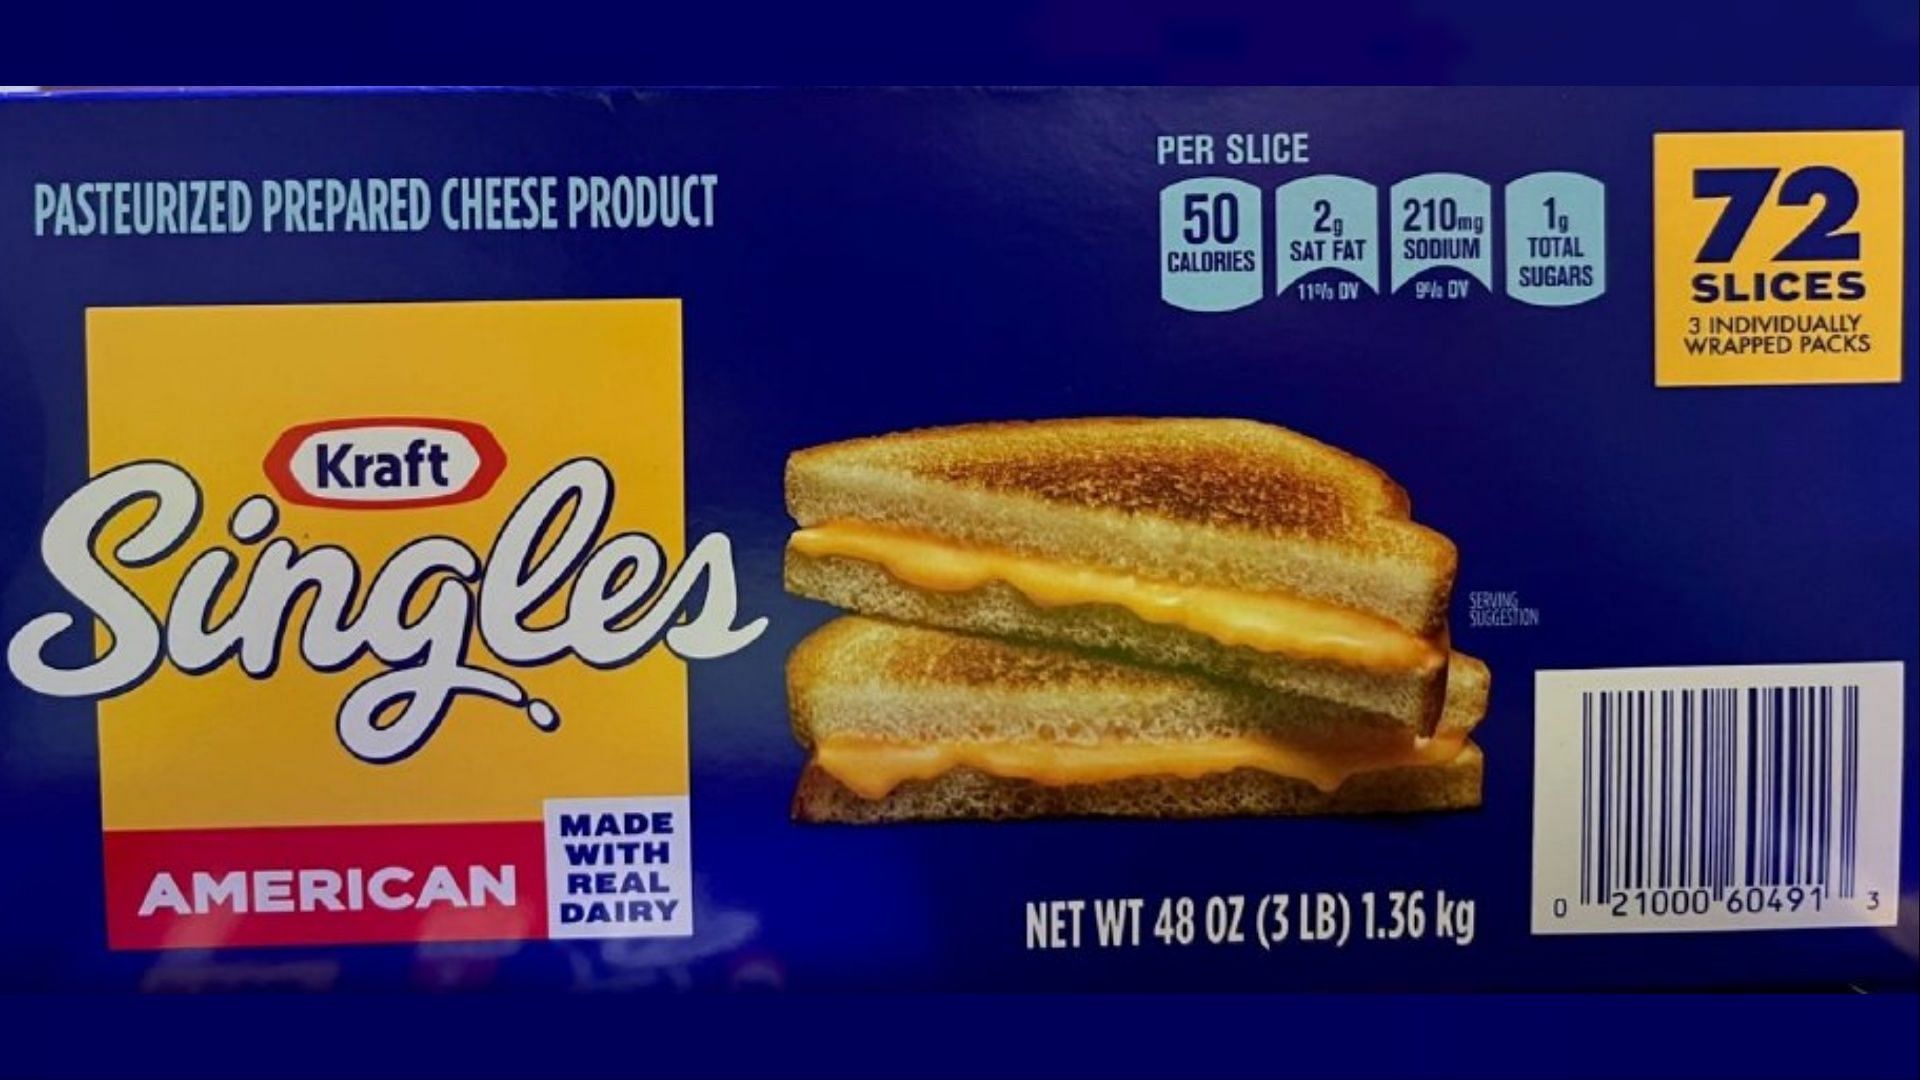 The recalled Kraft Singles American Cheese sliced may pose risks of choking and gagging (Image via Kraft Heinz)